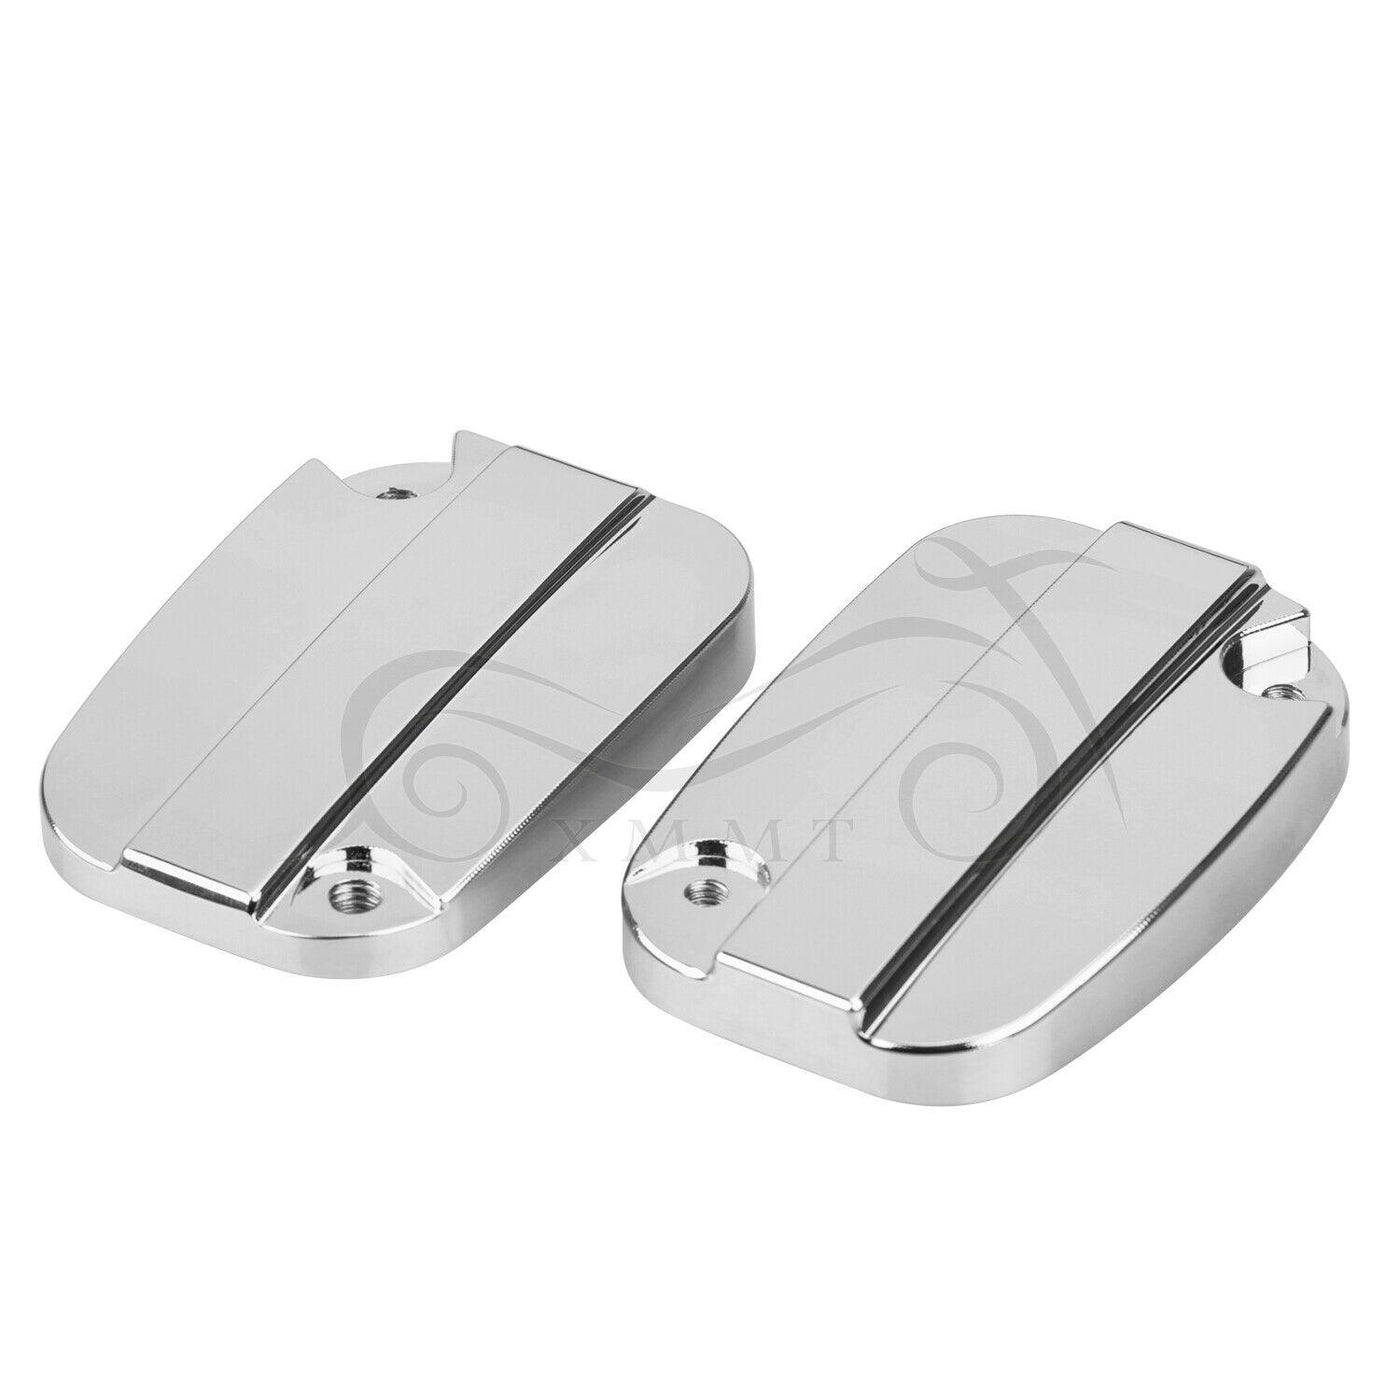 Chrome Brake Clutch Master Cylinder Cover For Harley Touring Electra Road Glide - Moto Life Products